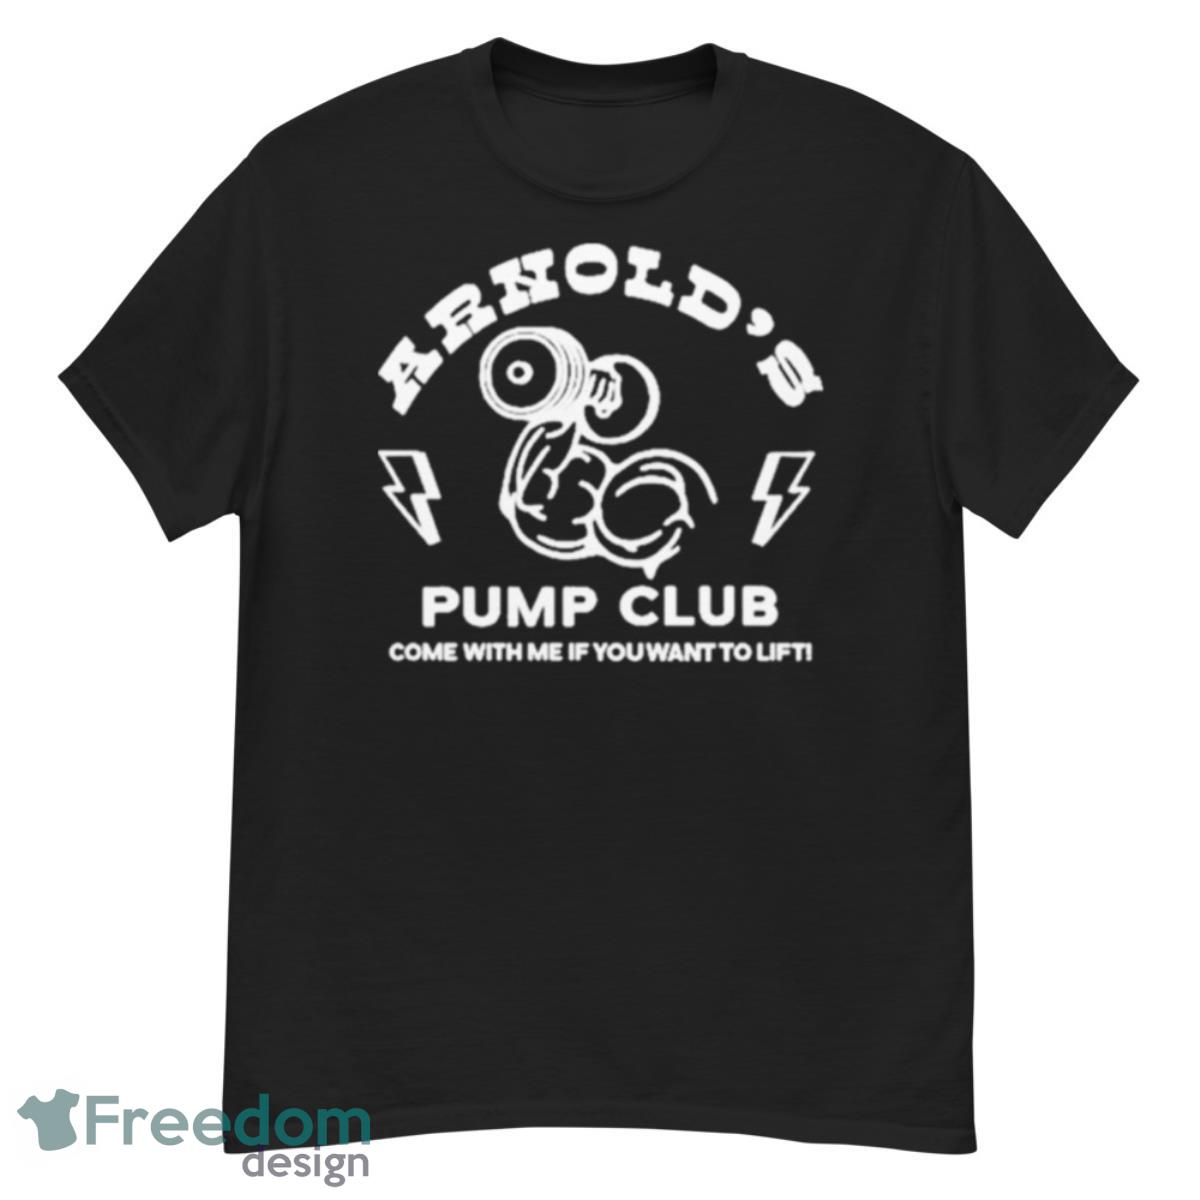 Arnold’s Pump Club Come With Me If You Want To Lift Shirt - G500 Men’s Classic T-Shirt